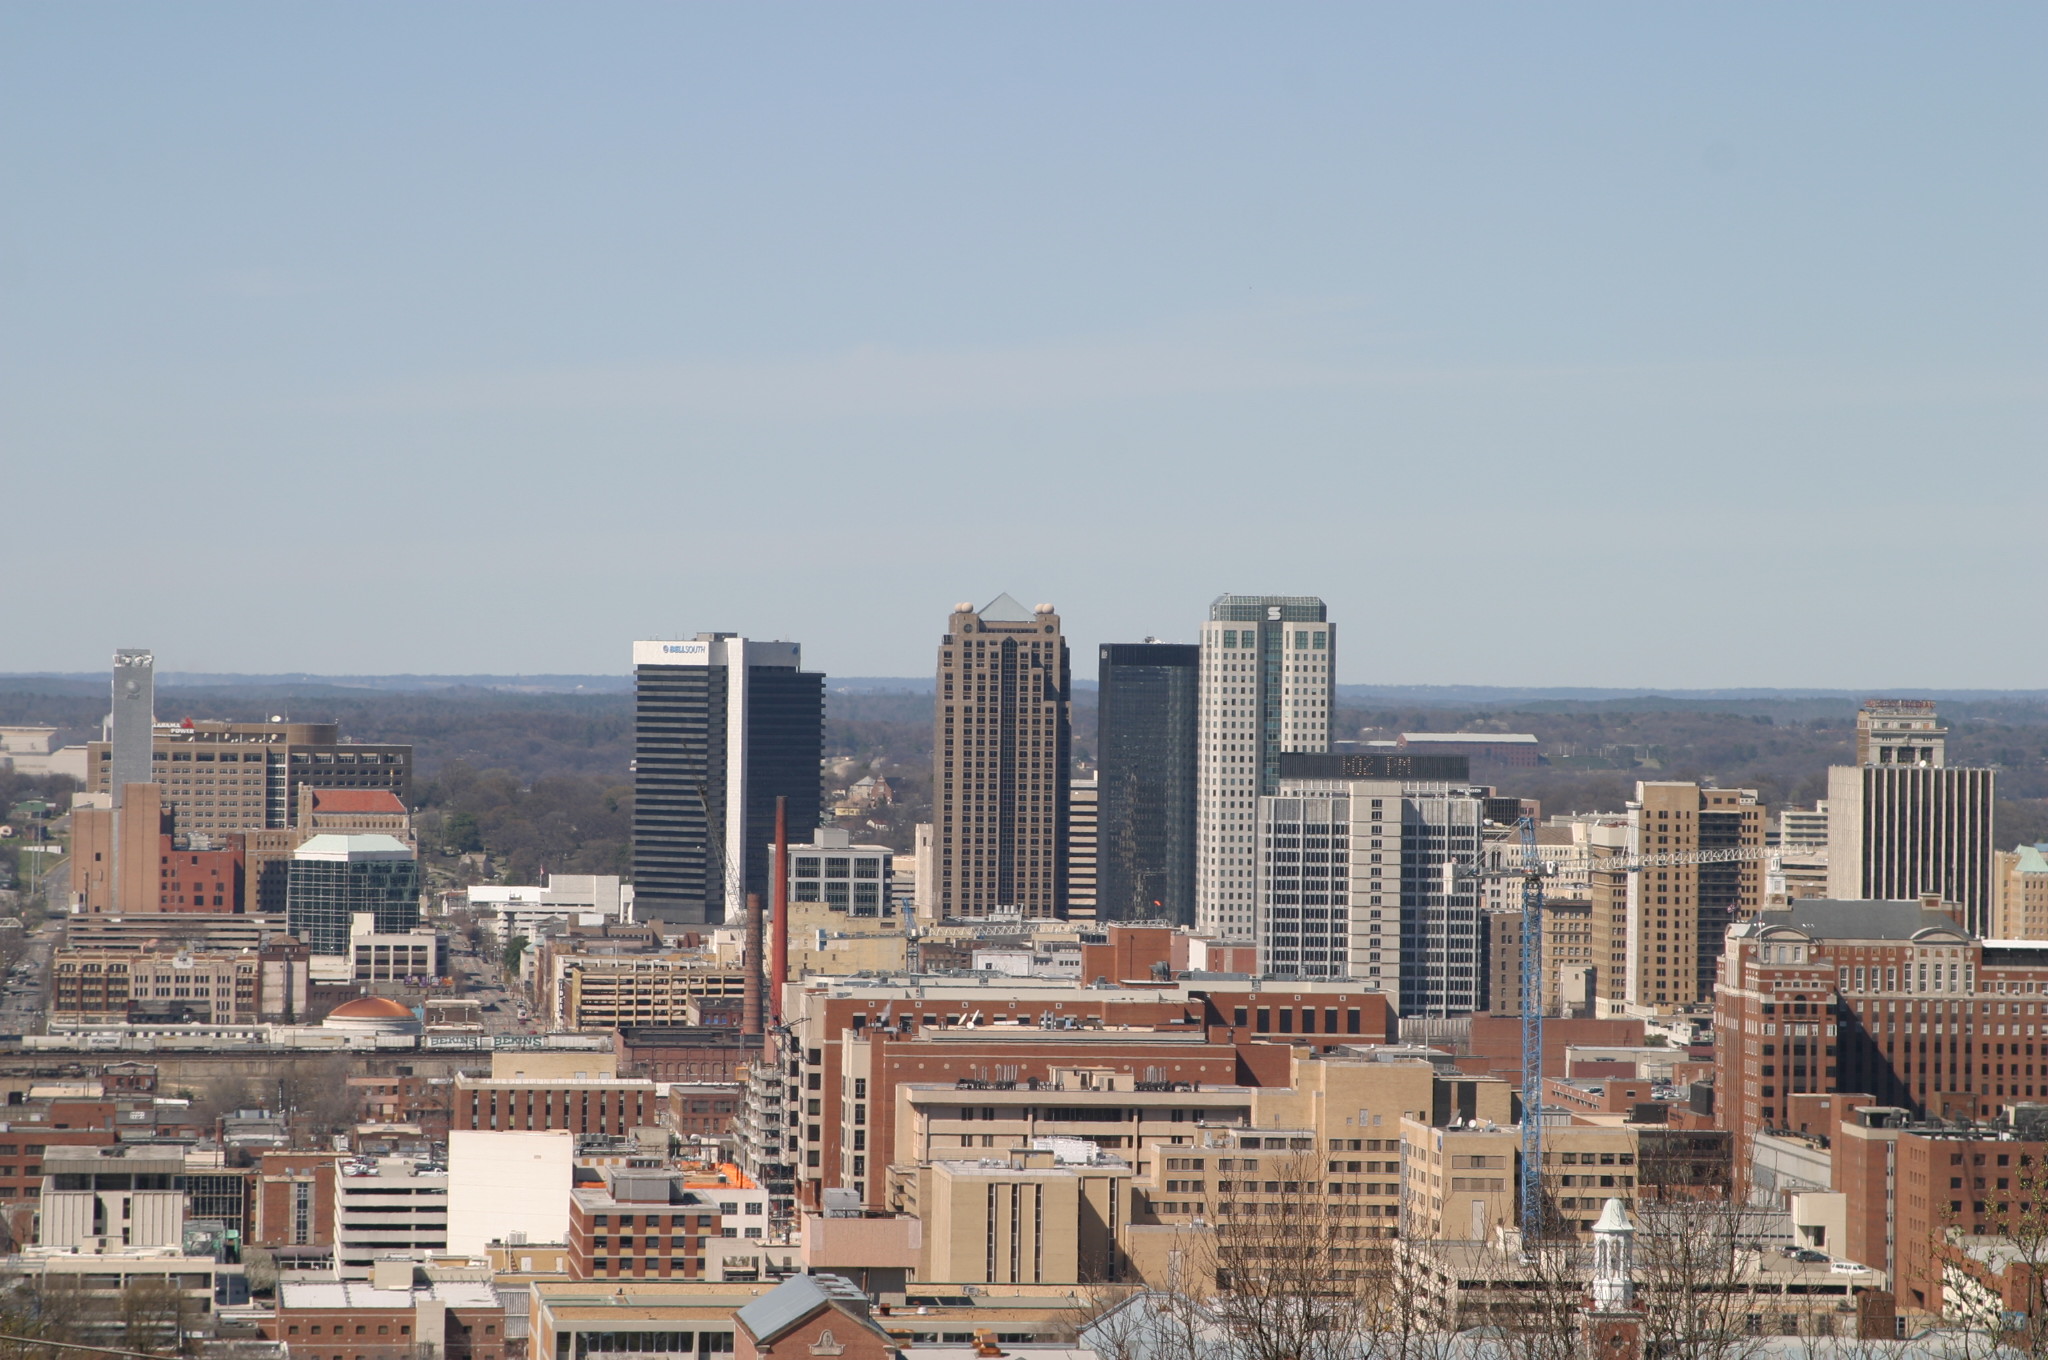 Forbes: Birmingham is the 6th most dangerous major city in U.S.